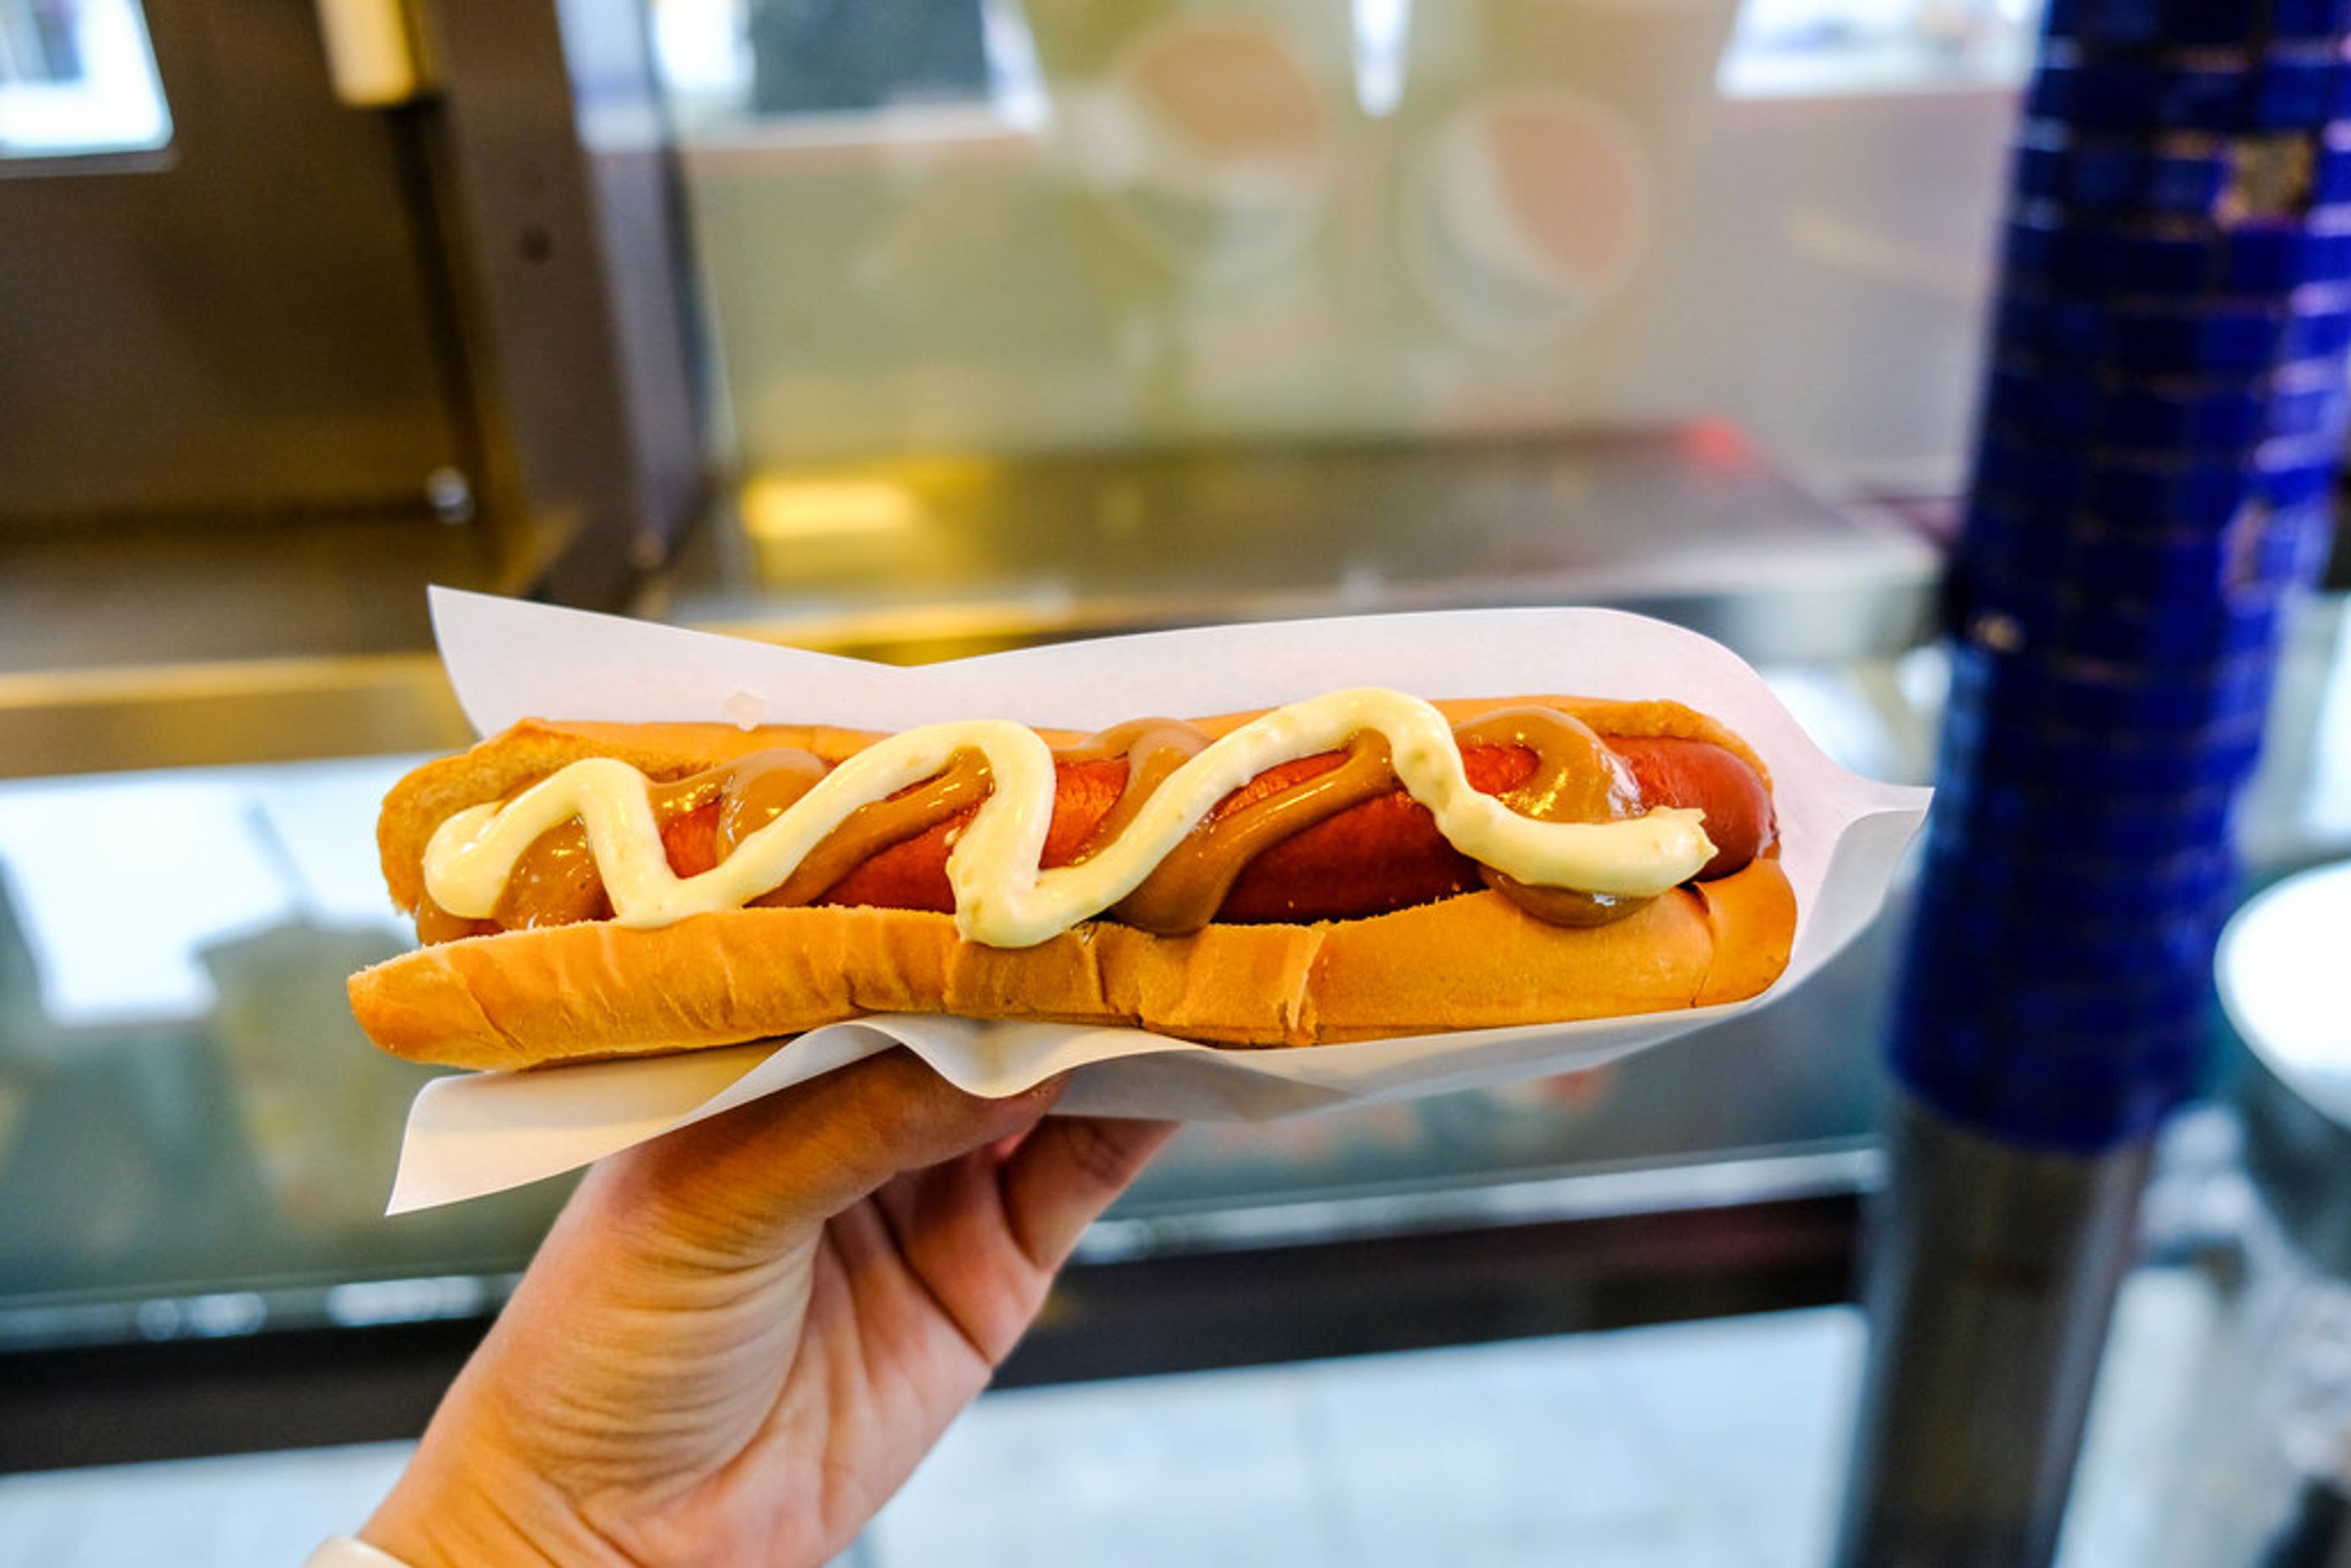 Traditional Icelandic food. A Icelandic Hot Dog with everything.